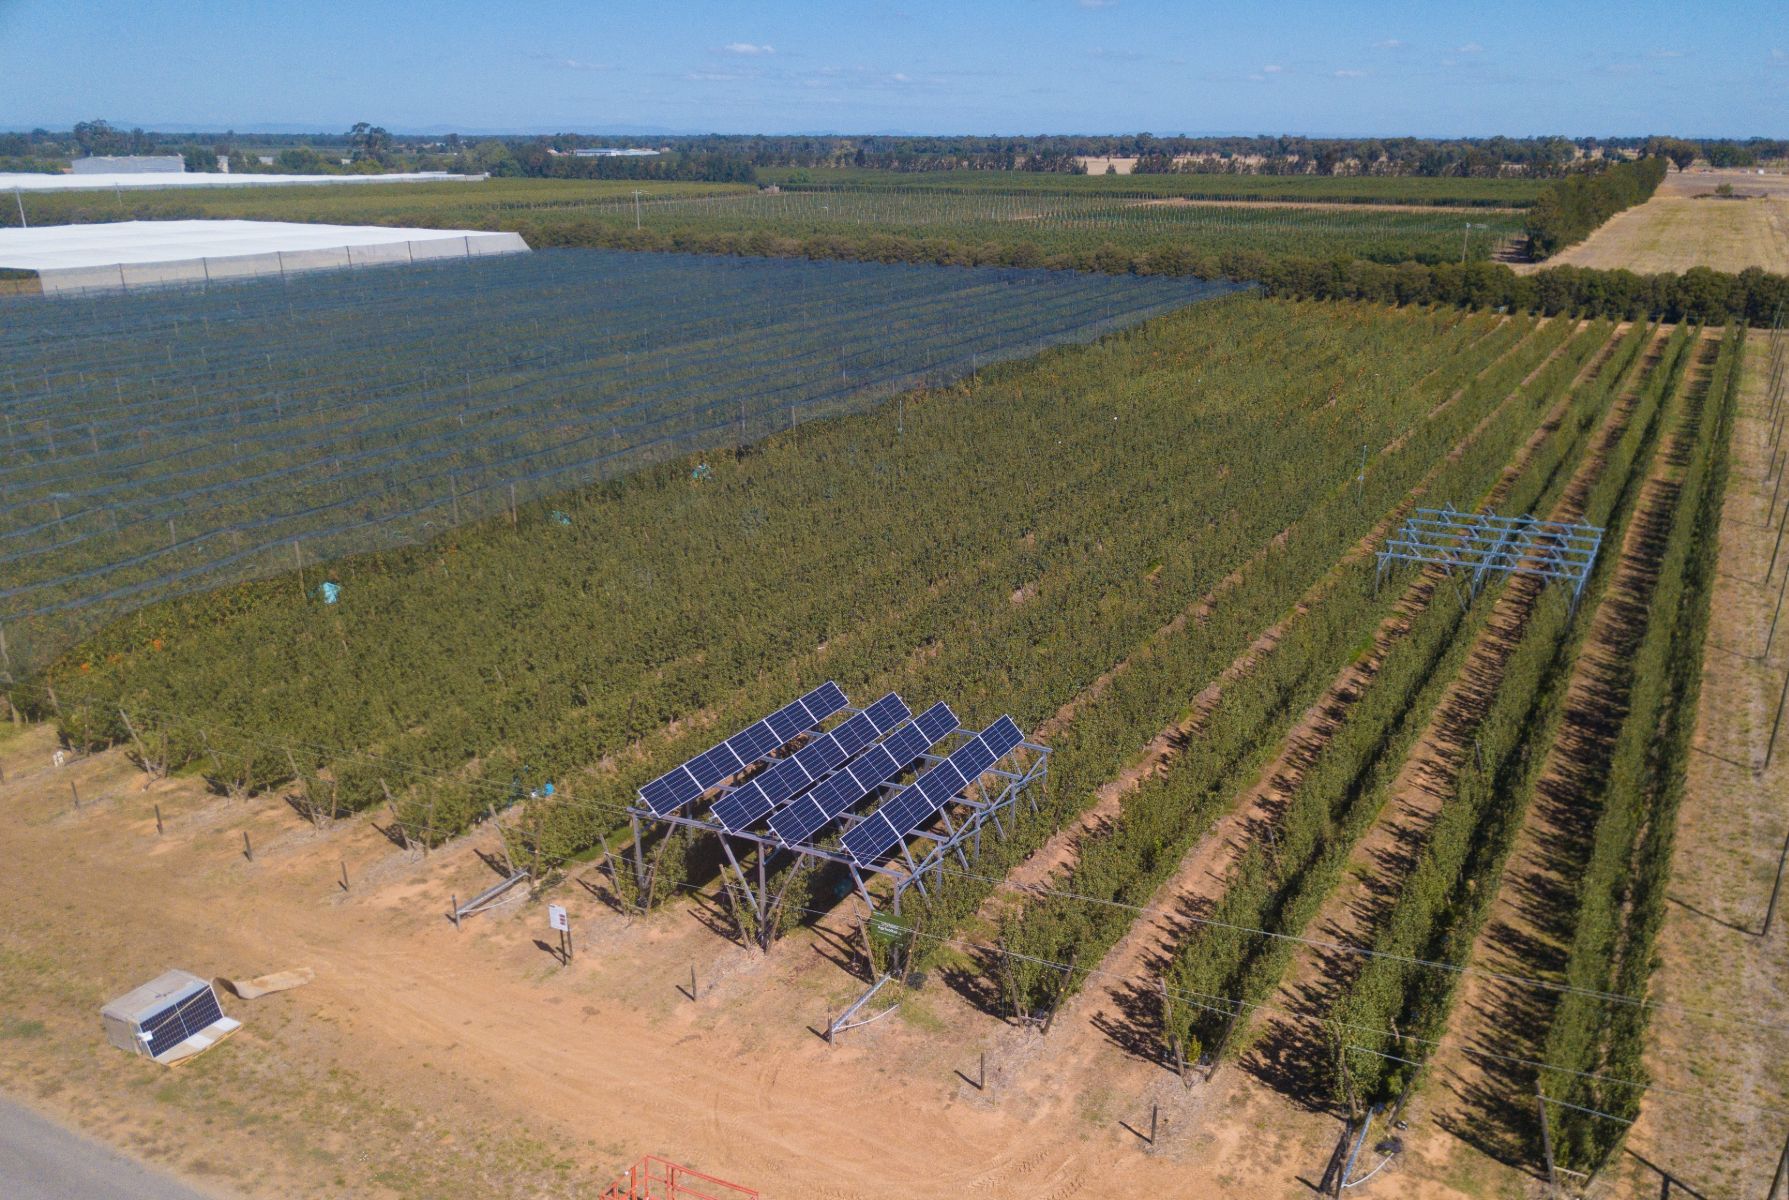 An aerial view of an orchard with solar panels